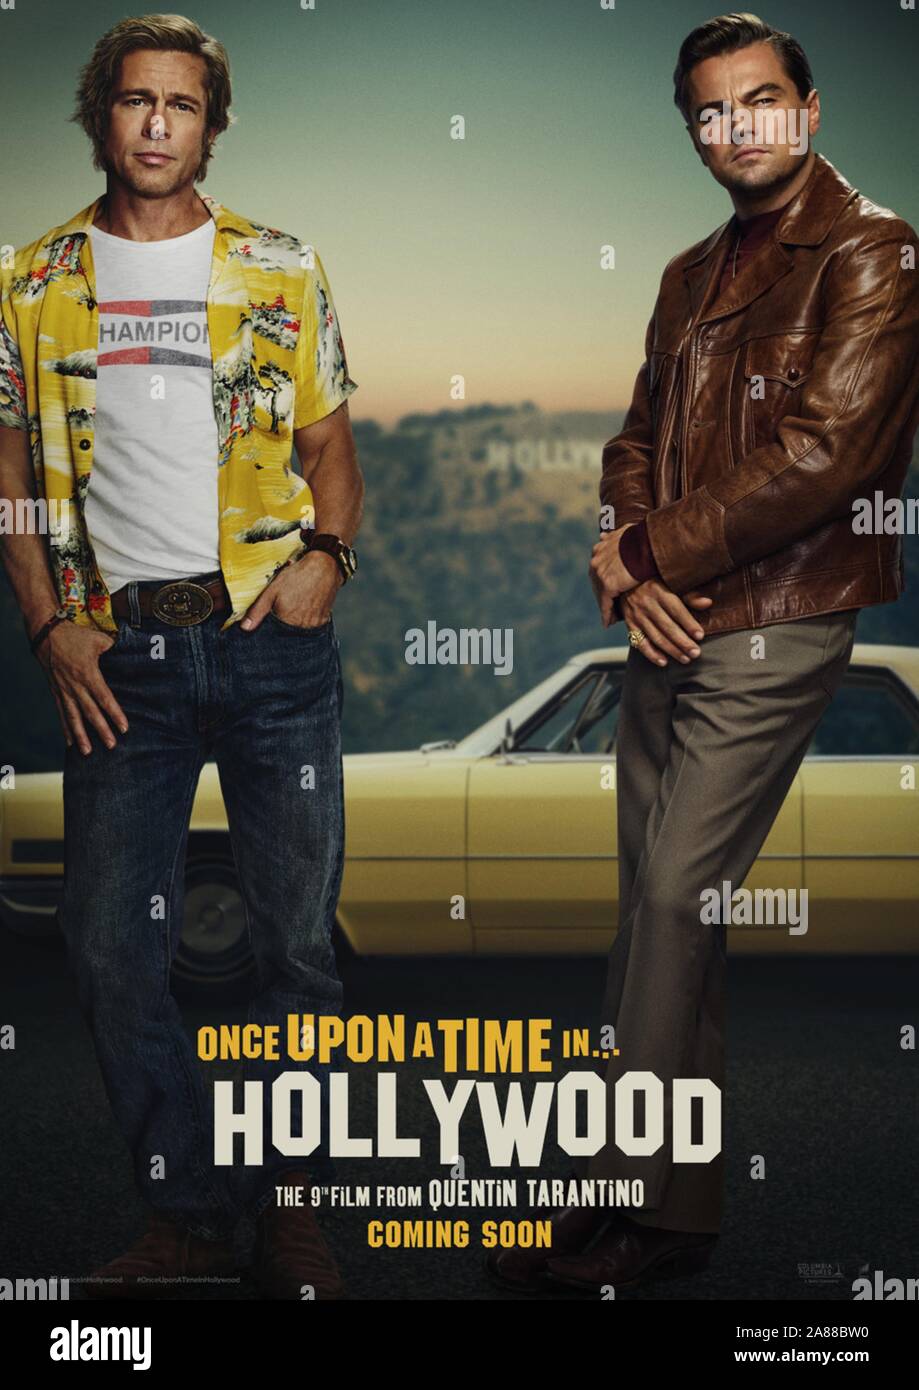 ONCE UPON A TIME IN HOLLYWOOD (2019) BRAD PITT  LEONARDO DICAPRIO  QUENTIN TARANTINO (DIR)  COLUMBIA/MOVIESTORE COLLECTION LTD Stock Photo